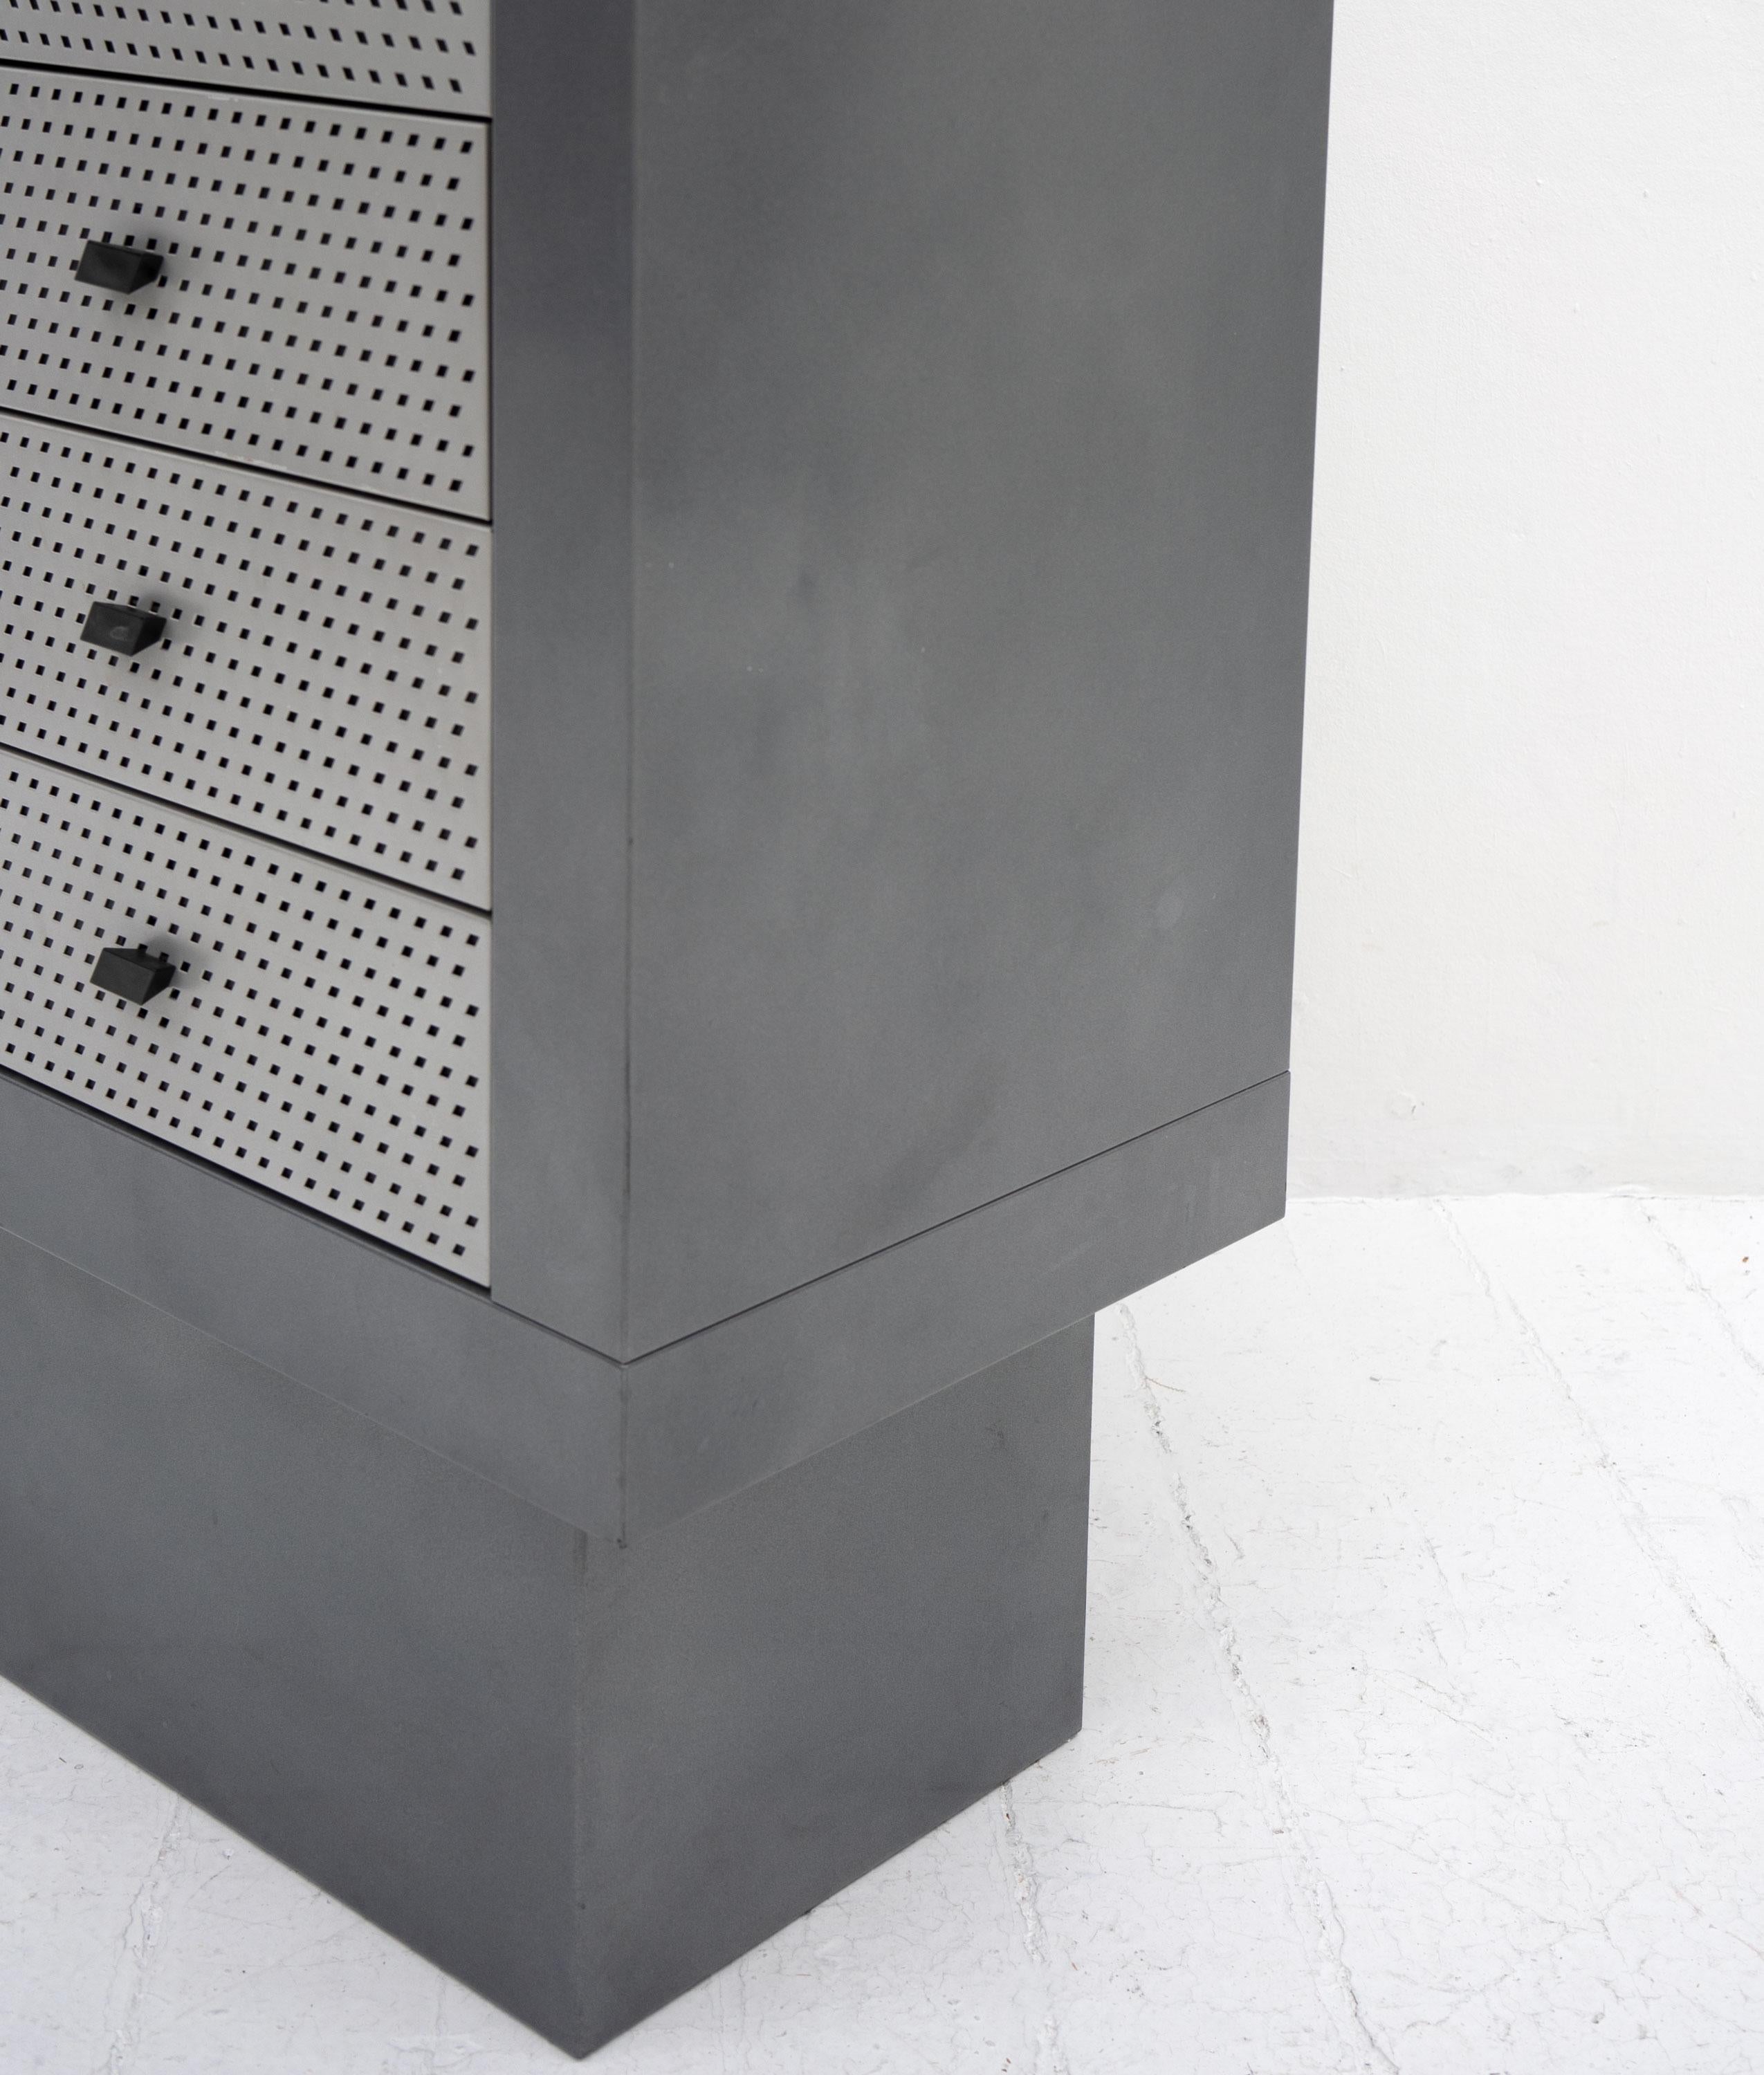 Late 20th Century Settimanale Chest of drawers / Tallboy by Matteo Thun for Bieffeplast, 1985 For Sale